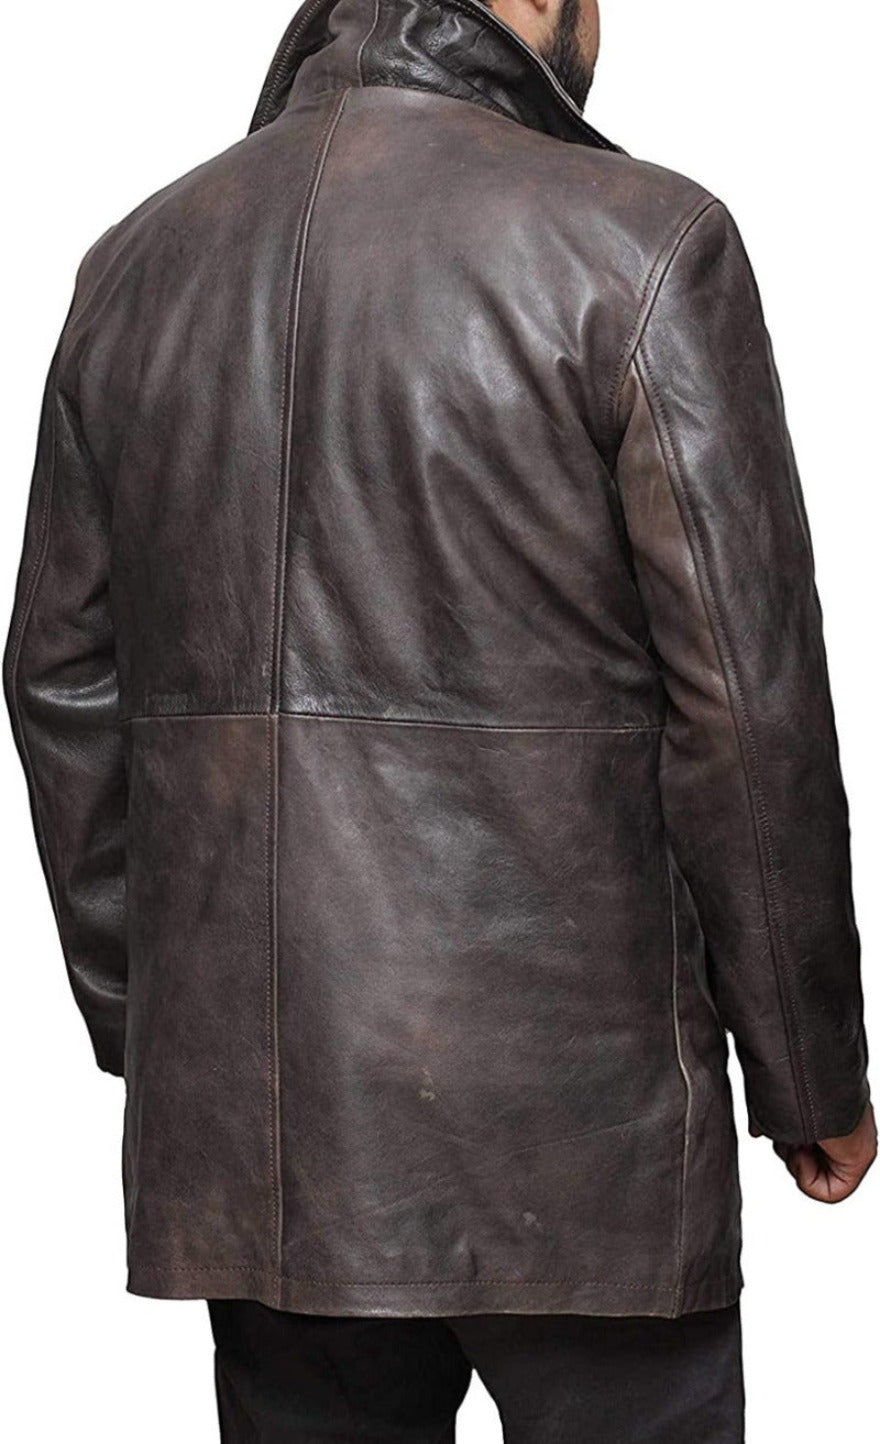 Mens long leather trench coat distressed brown, back view